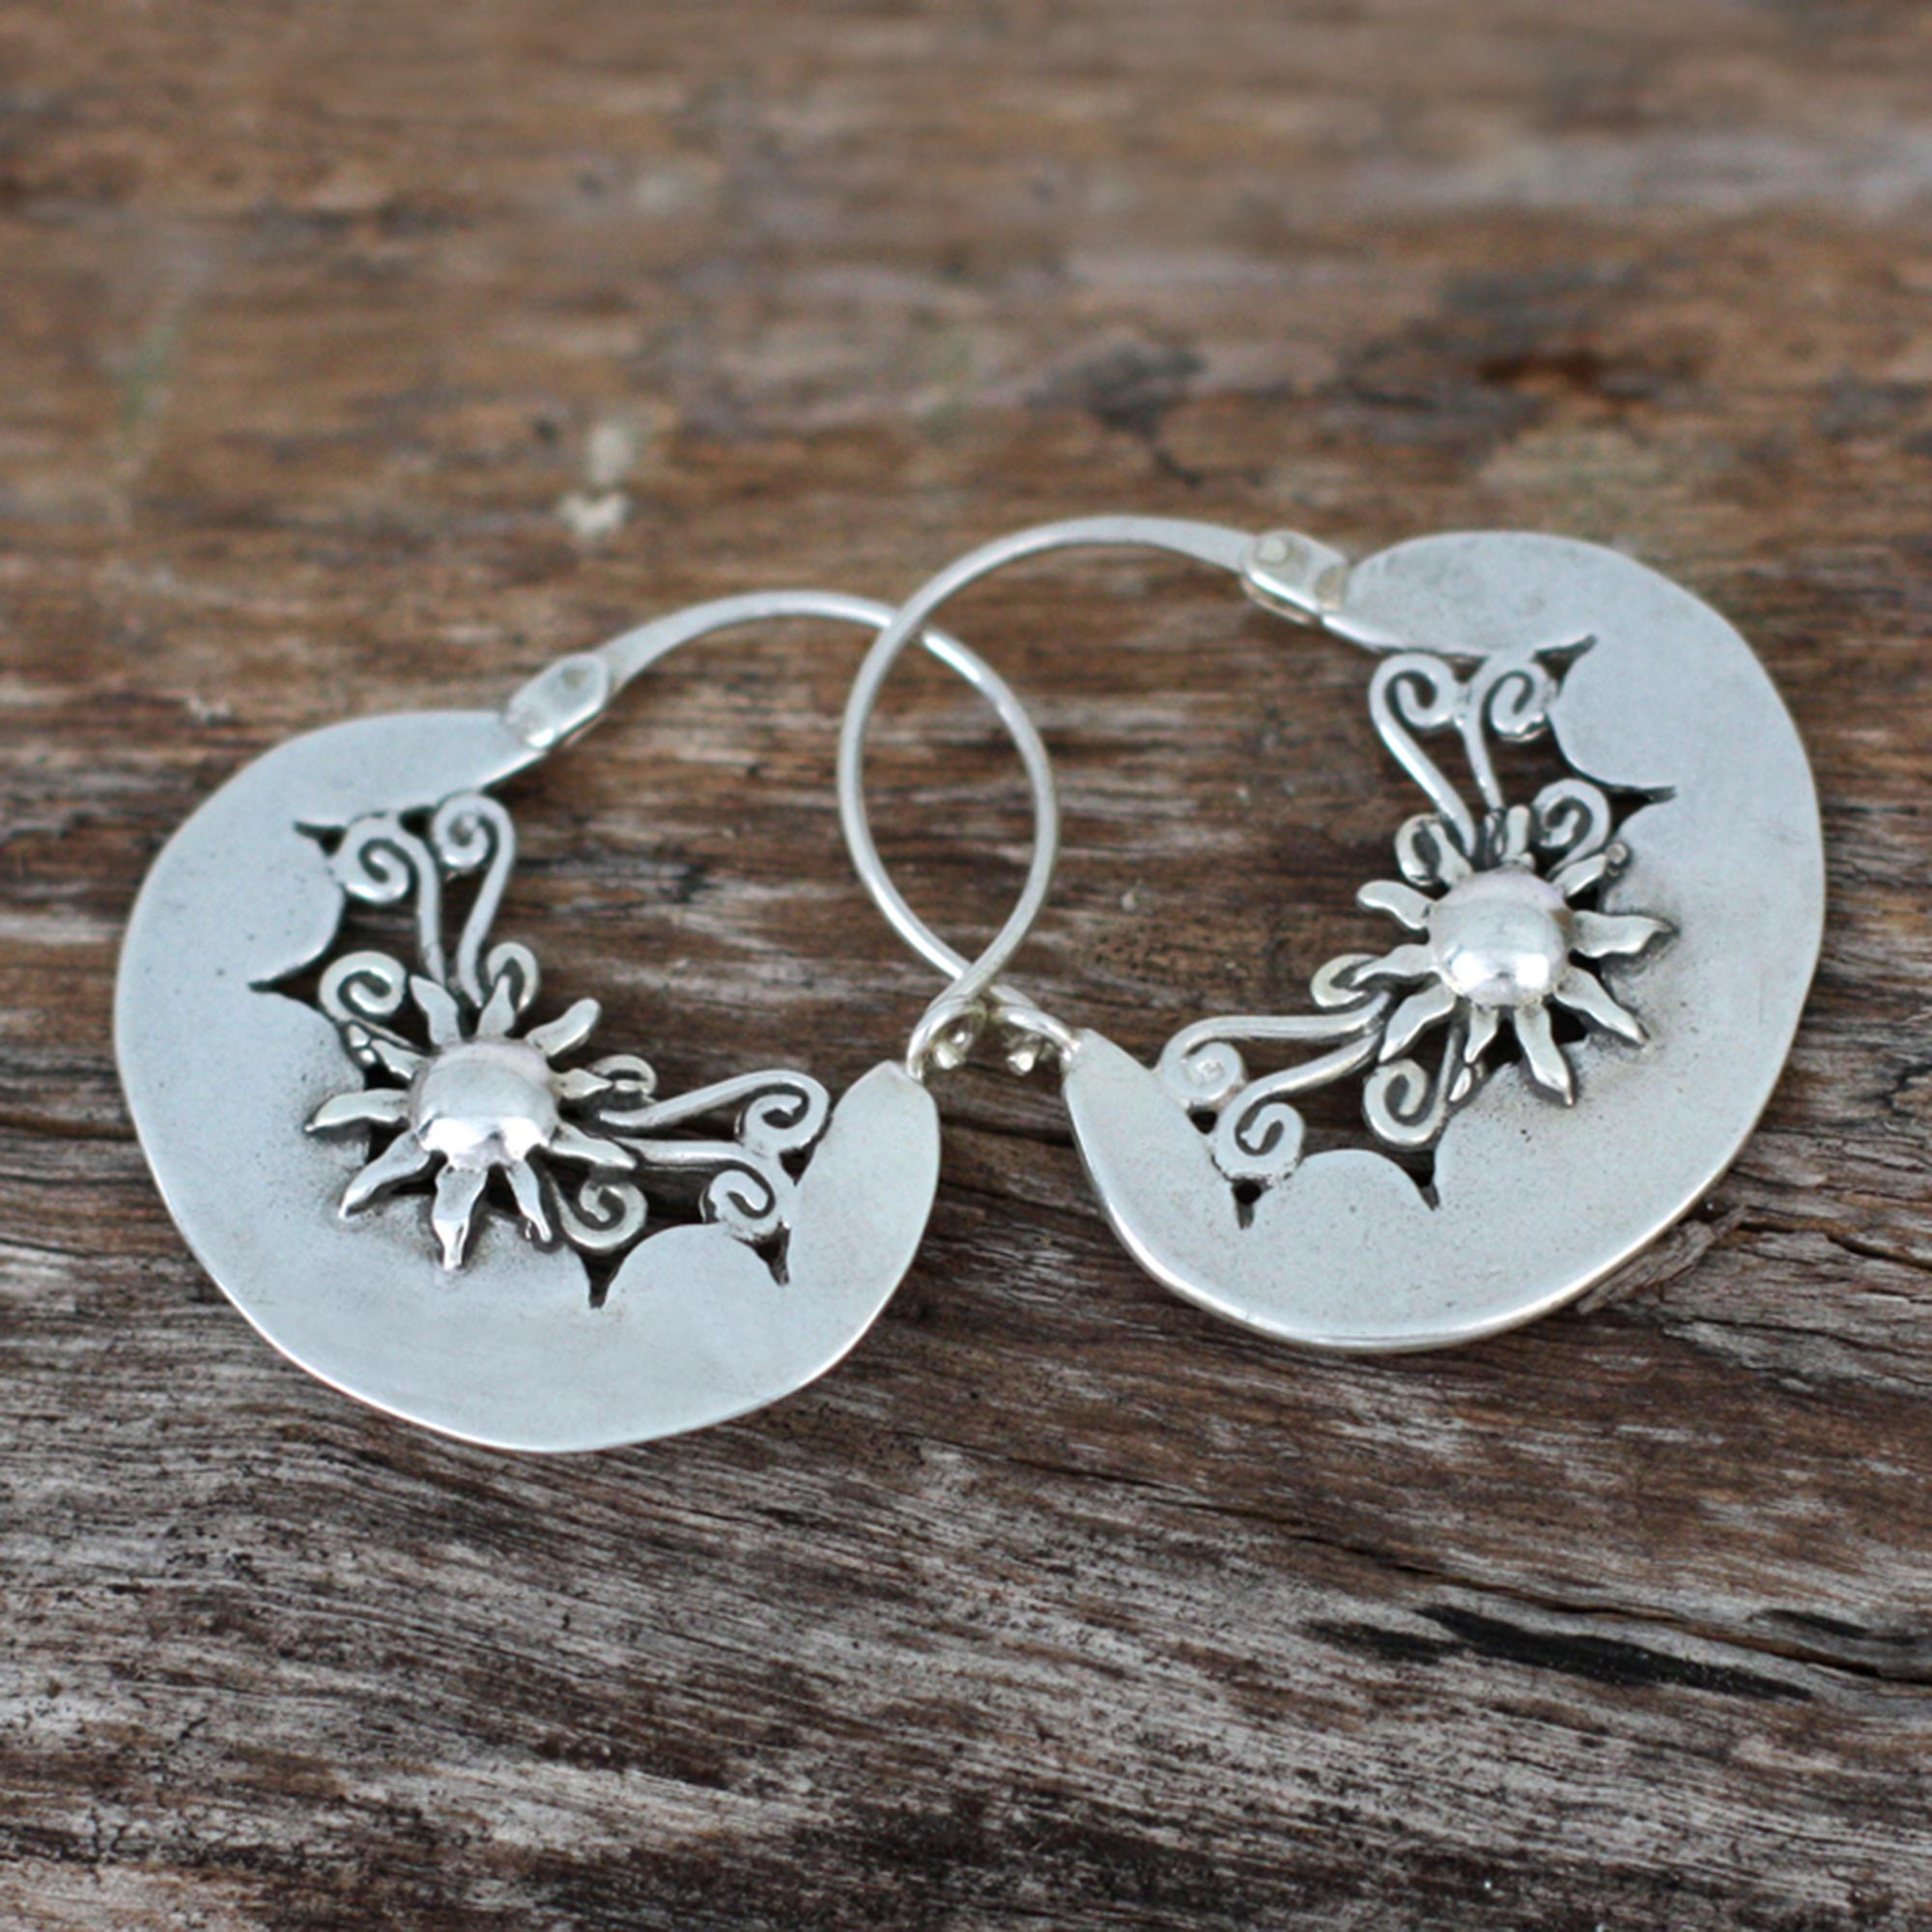 Handcrafted Sterling Silver Hoop Earrings from Mexico, 'Sun Renaissance'